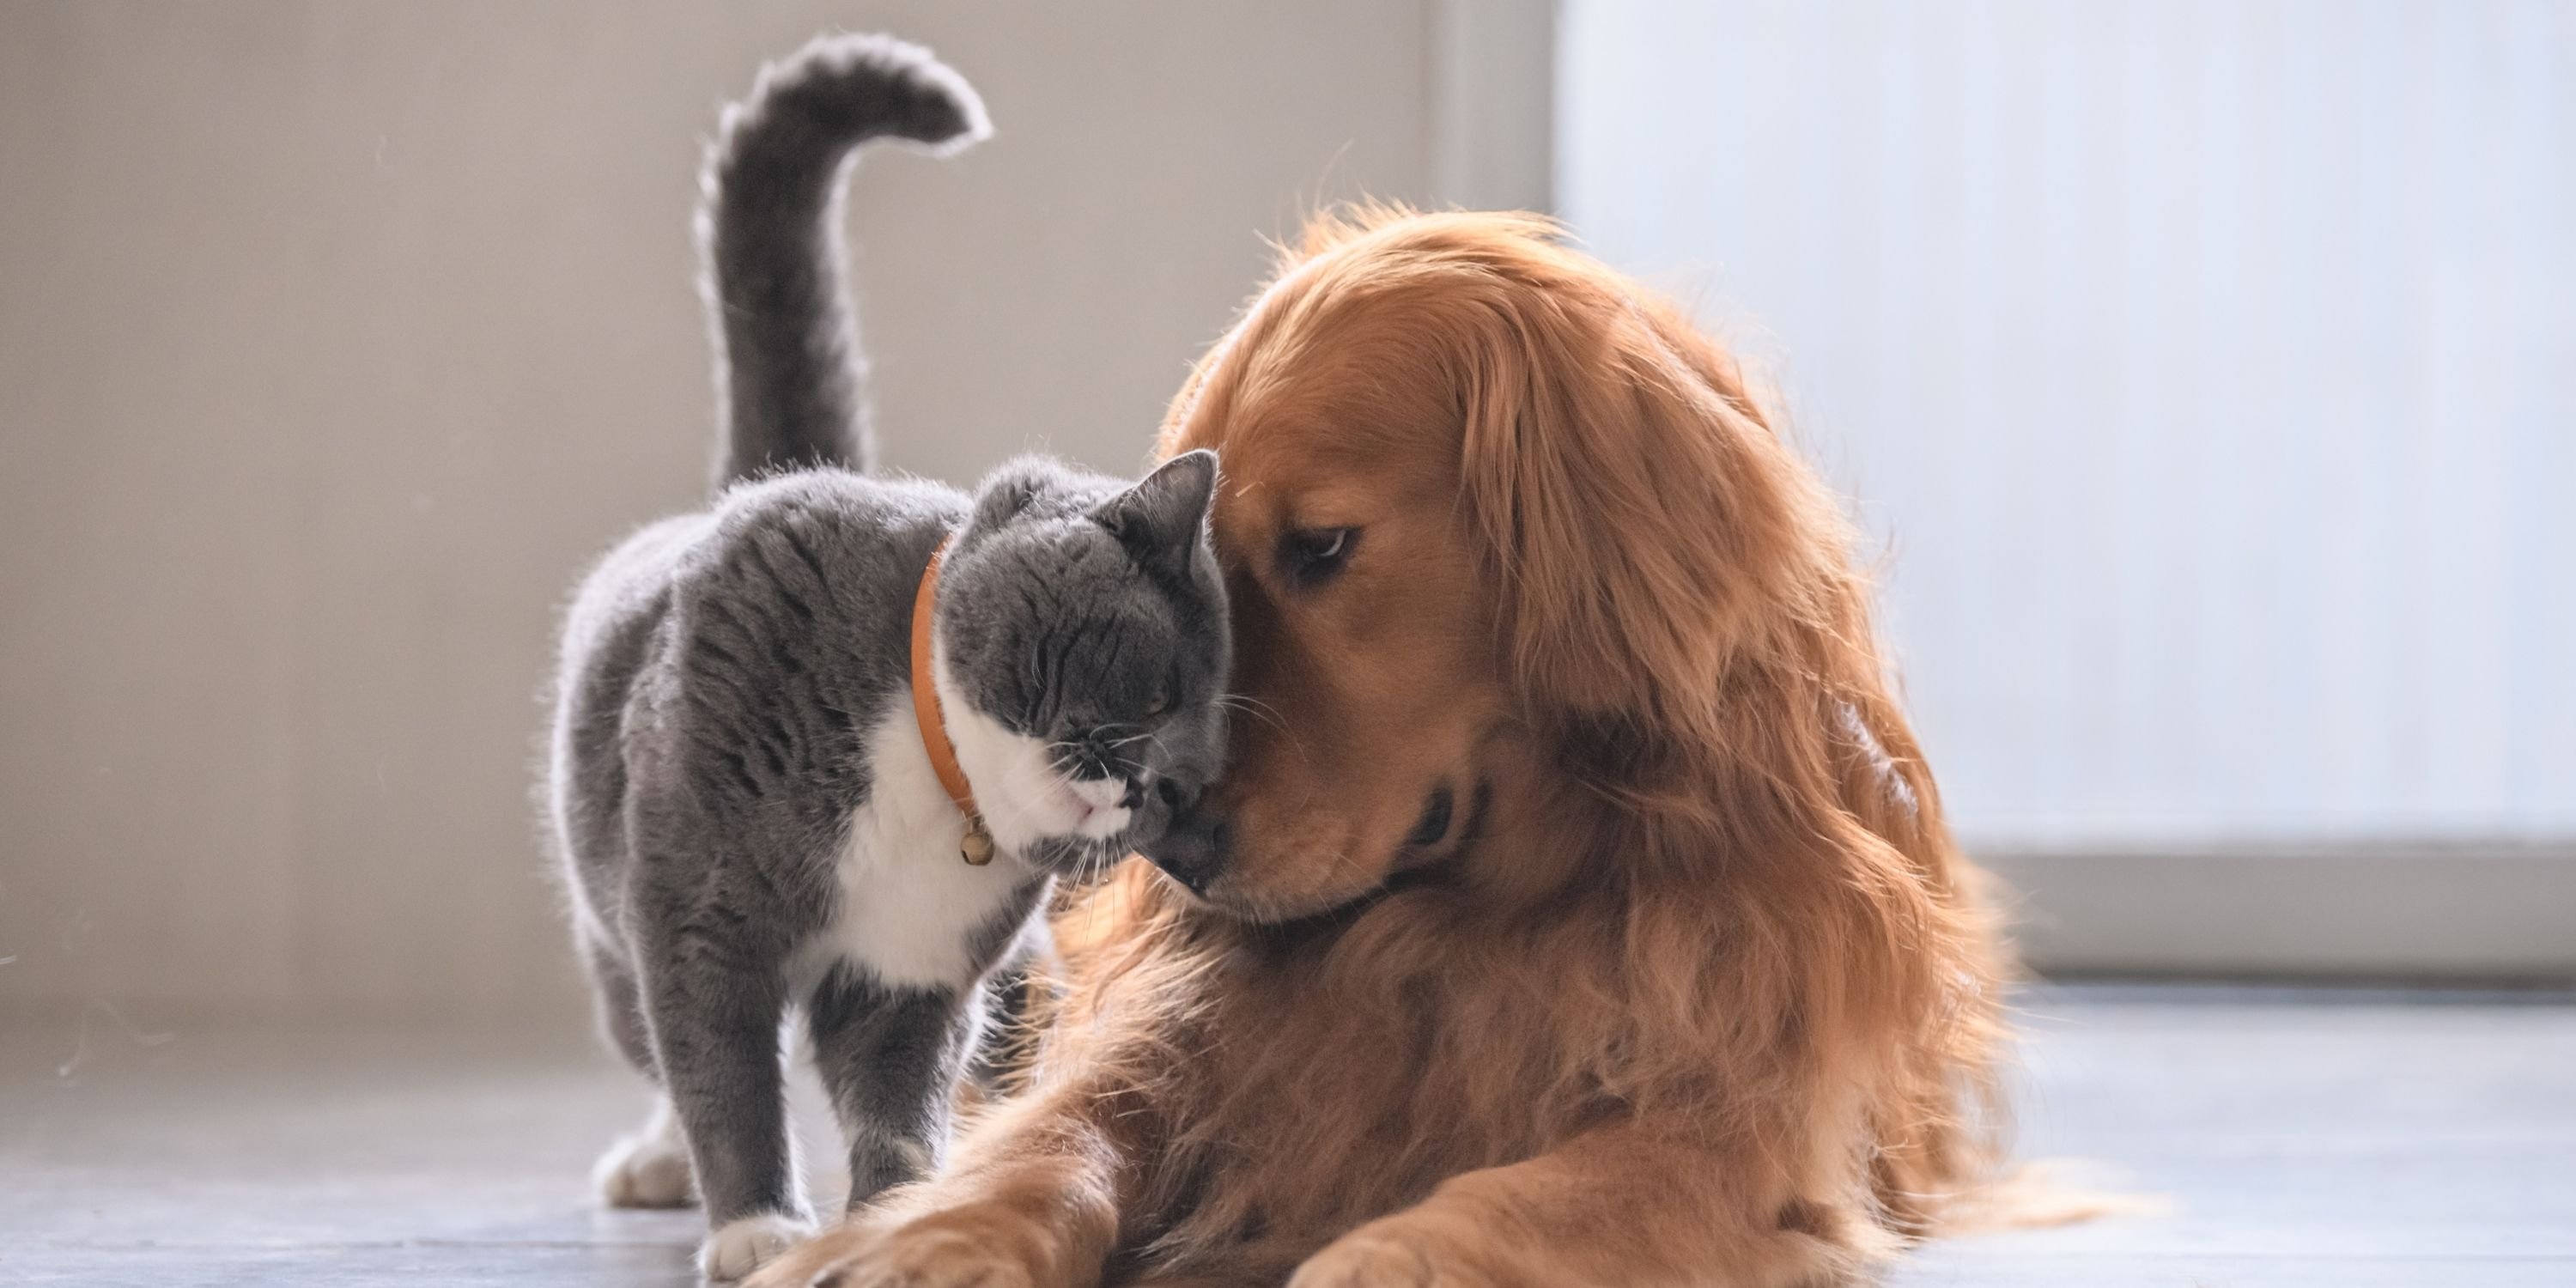 cats and dogs understanding each other